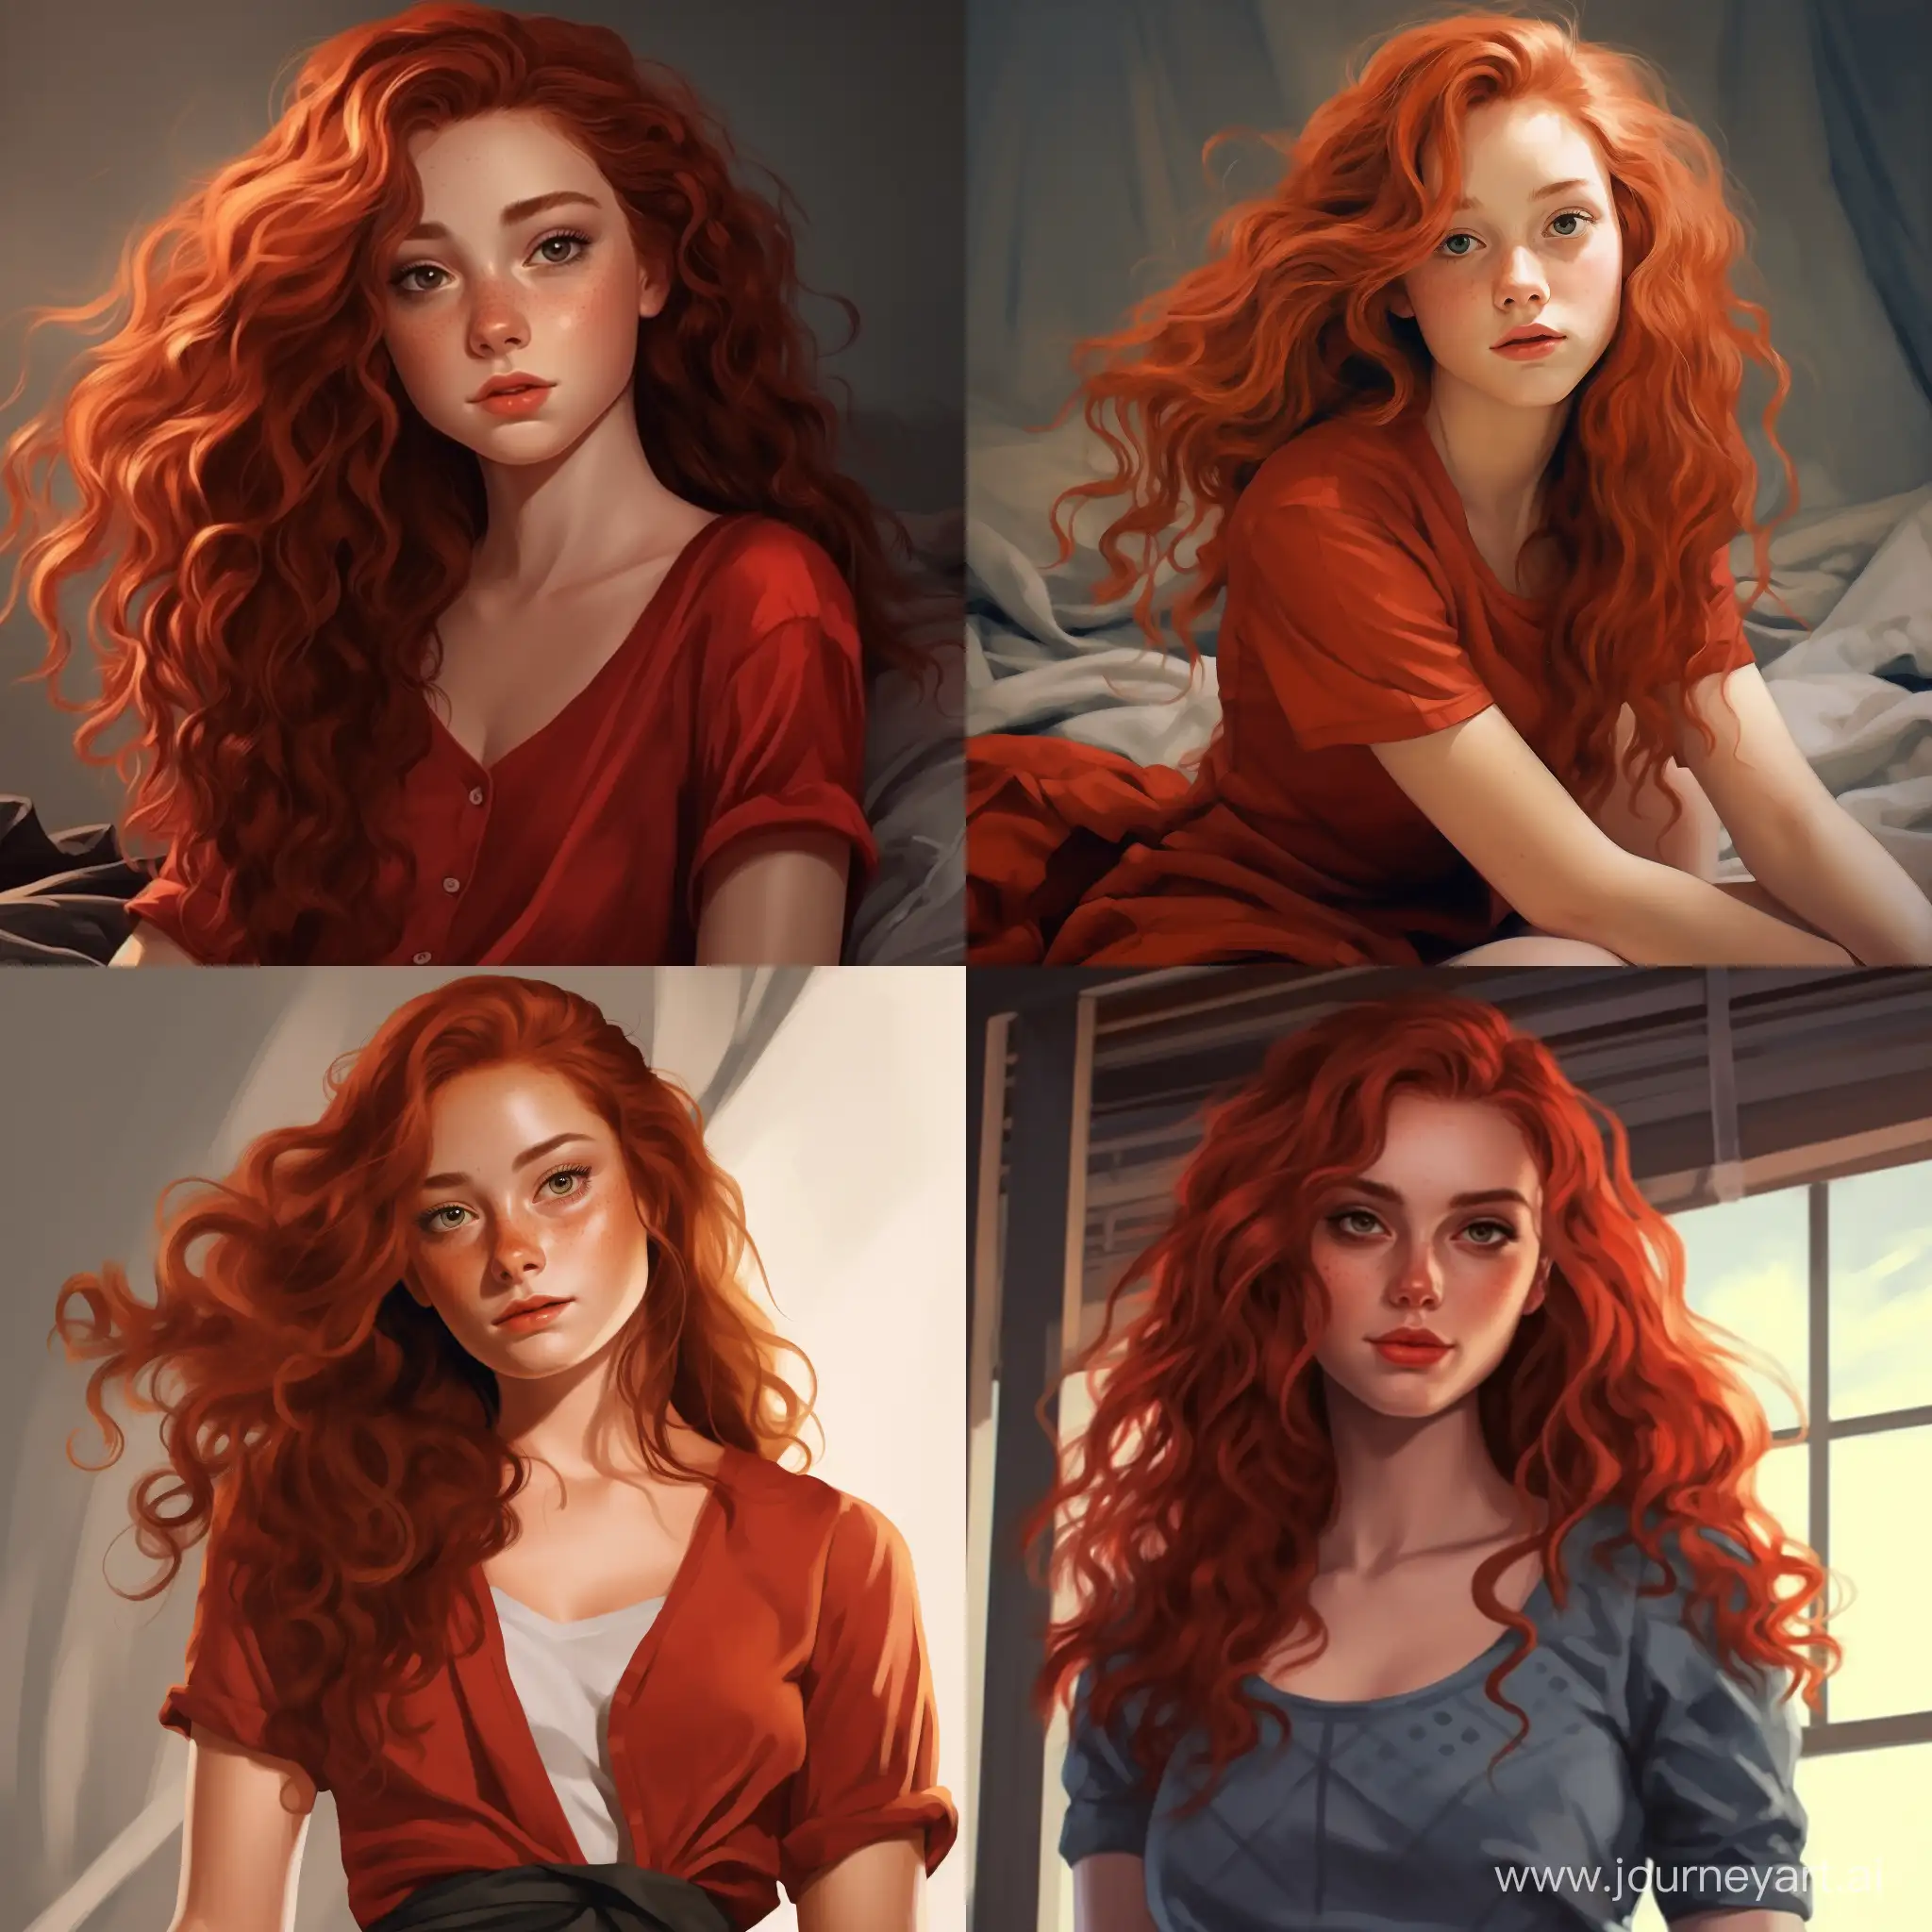 Charming-Teen-with-Curly-Dark-Red-Hair-in-Stylish-Red-Ensemble